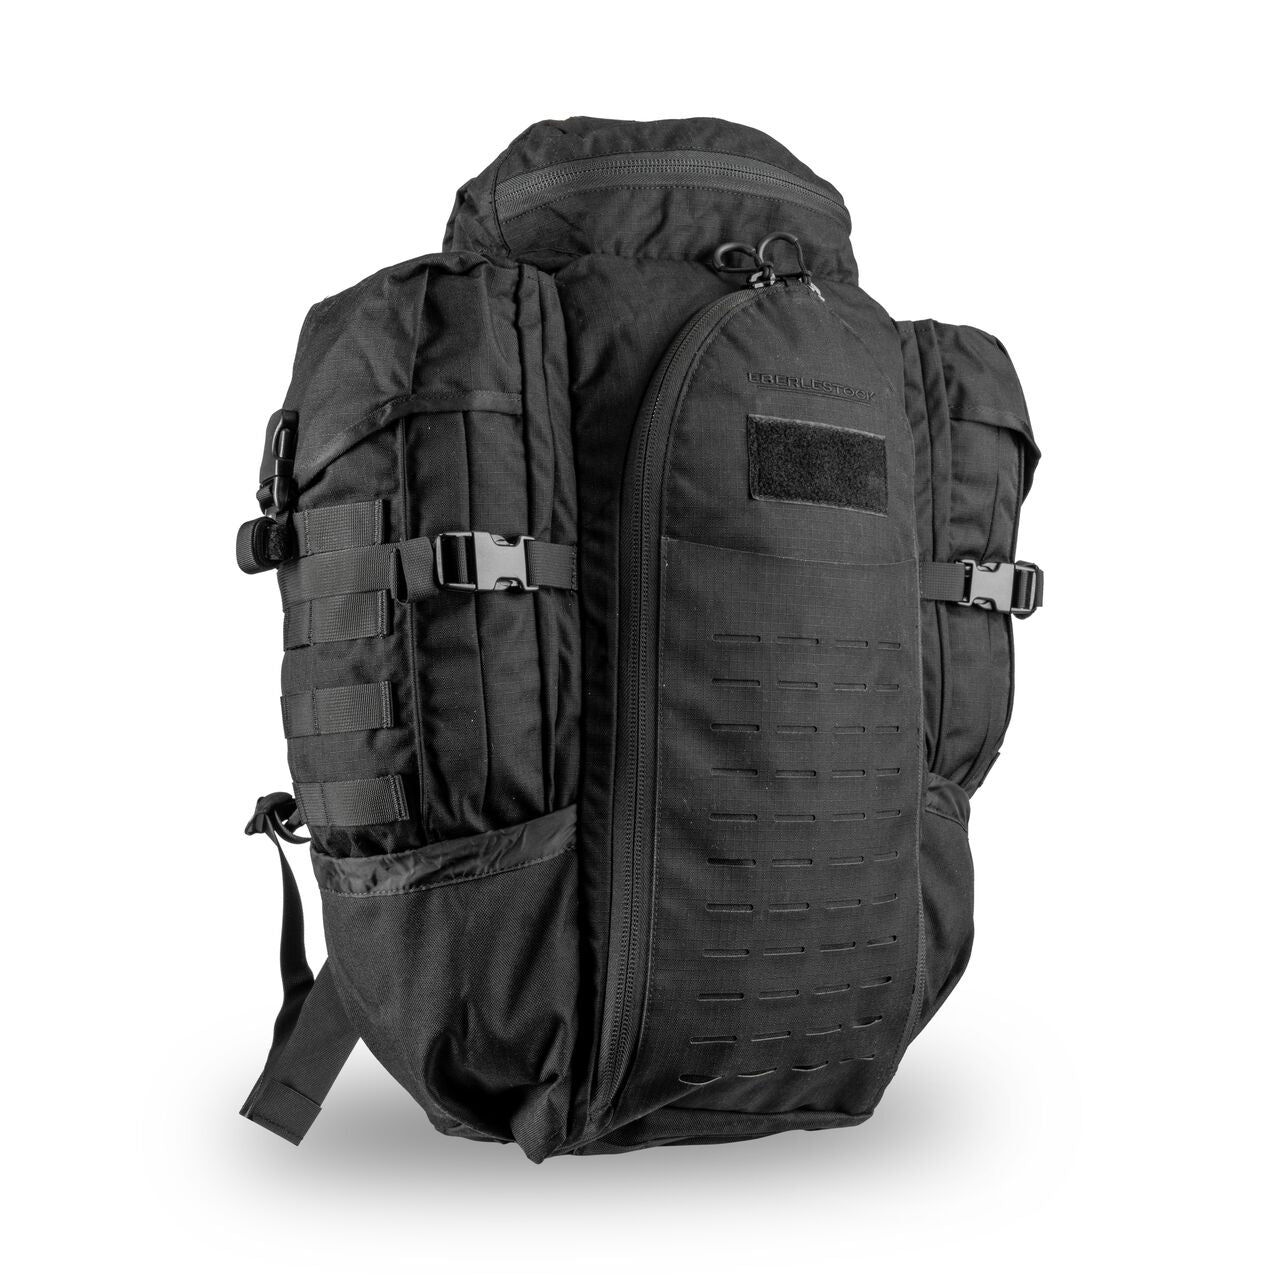 Eberlestock Halftrack Pack | 4.9 Star Rating w/ Free Shipping and